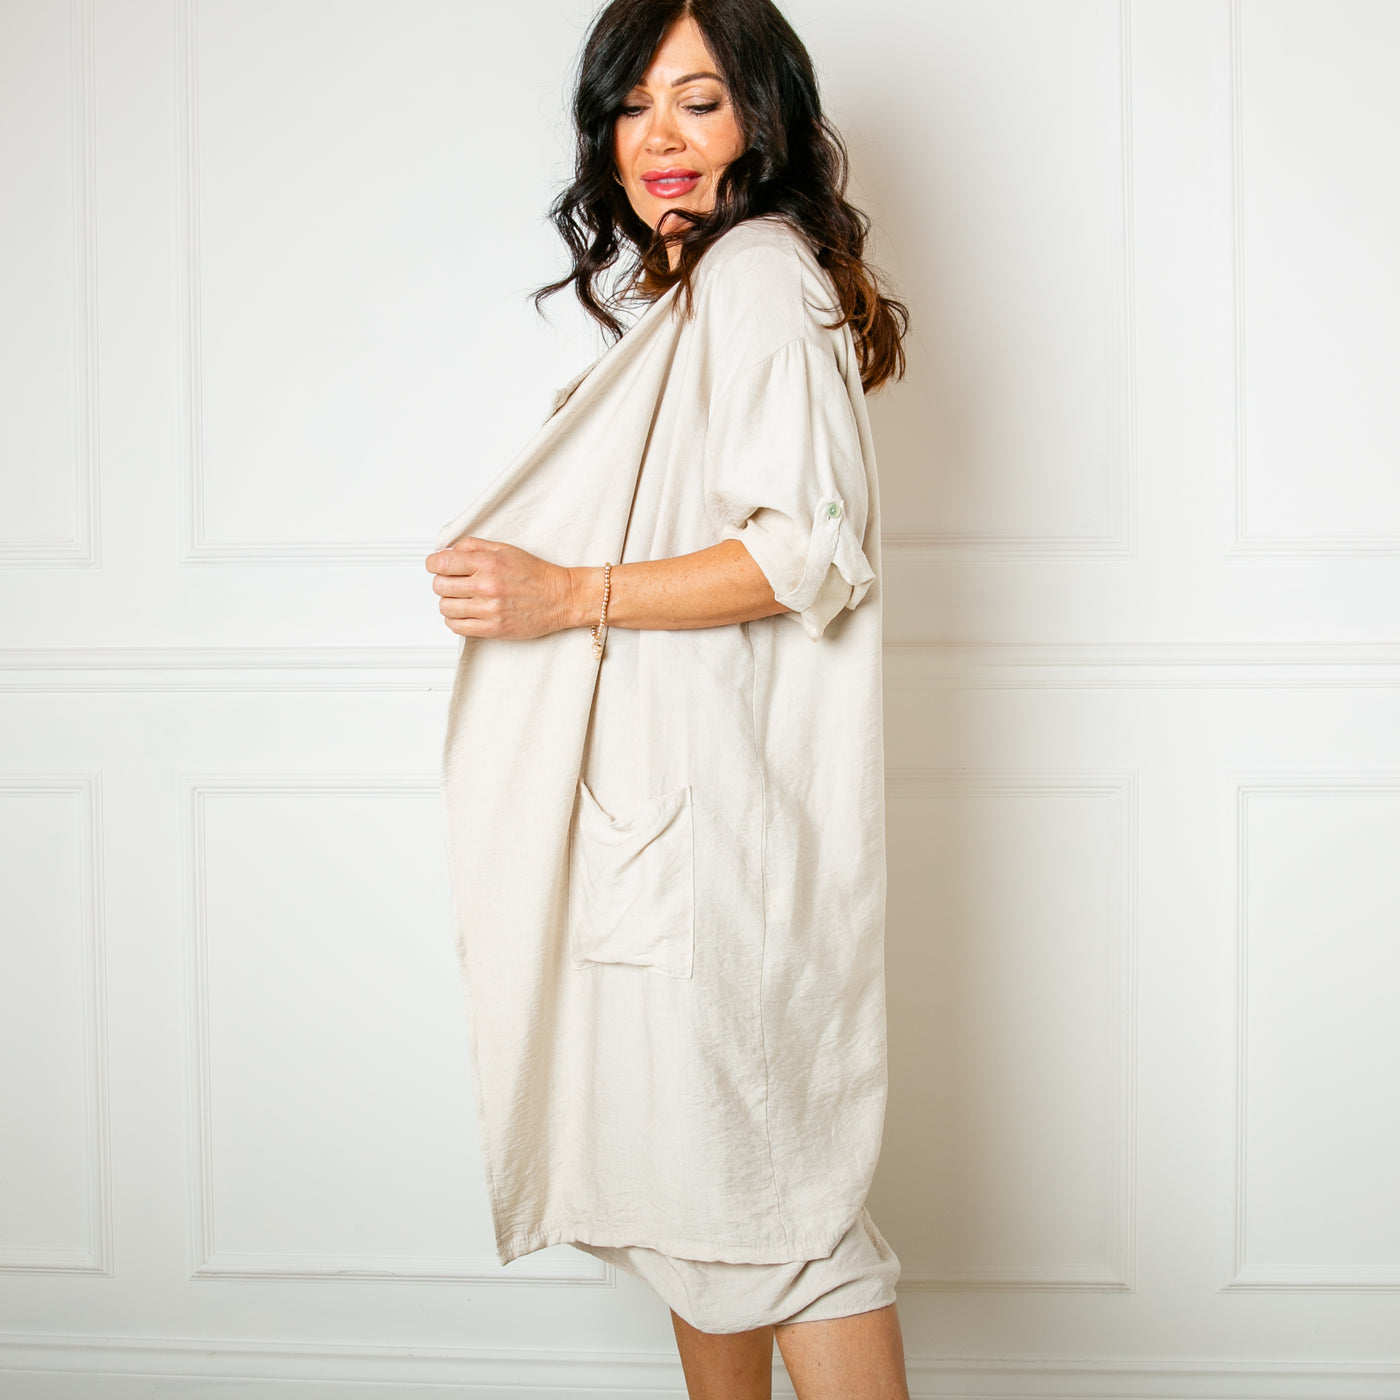 The stone cream Lightweight Waterfall Jacket with pockets on either side and an open draped front